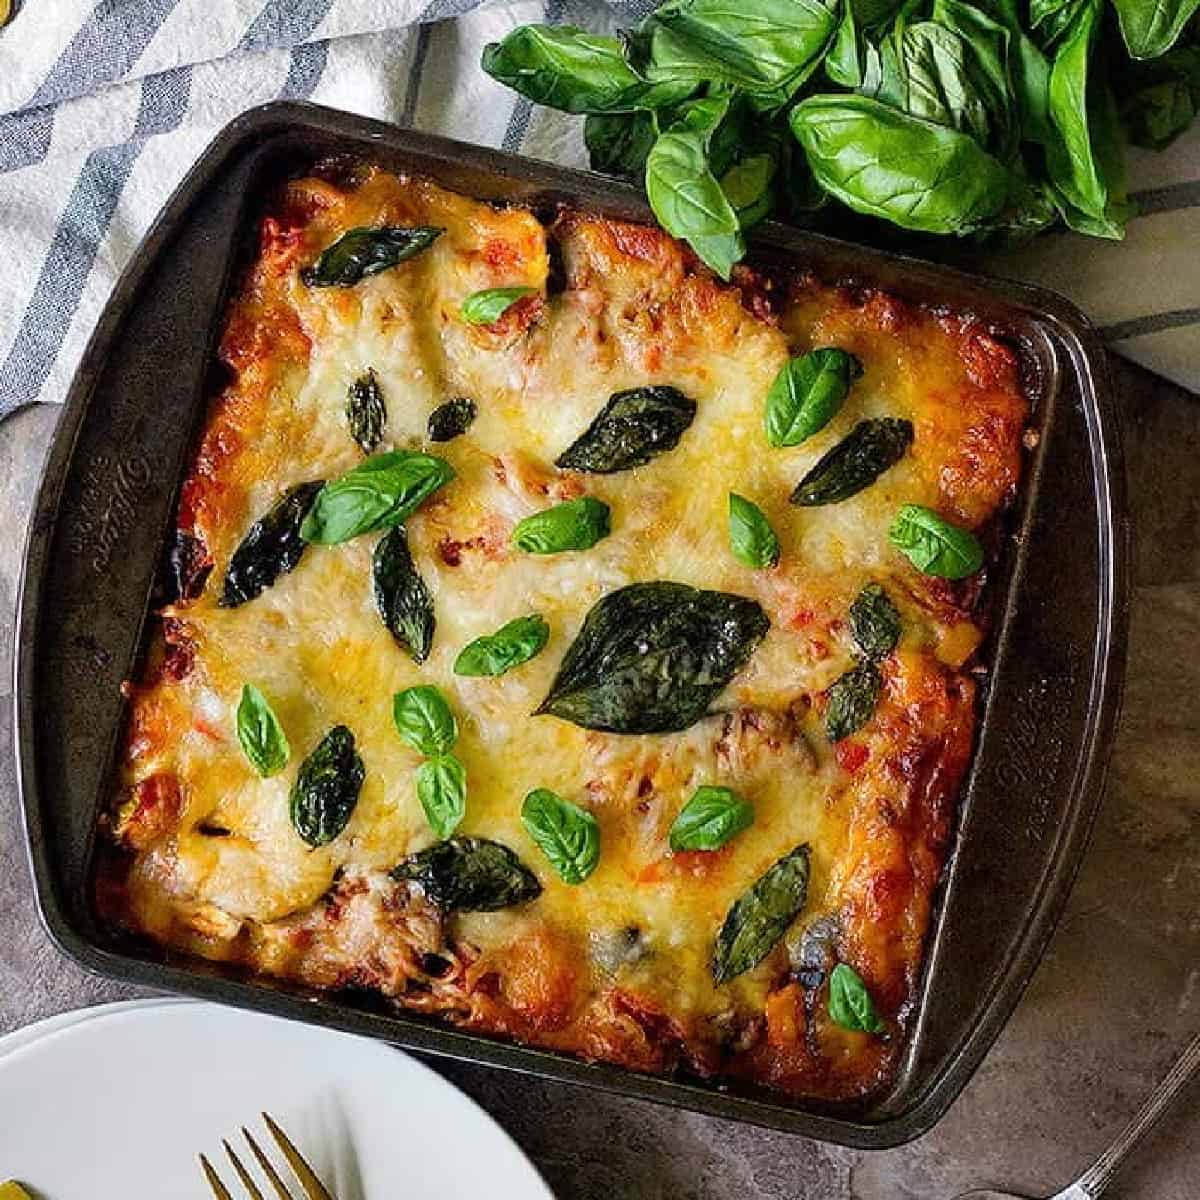 Here's an easy vegetable lasagna recipe that can be enjoyed any day of the week. This vegetarian lasagna is cheesy, packed with veggies and absolutely delicious!
